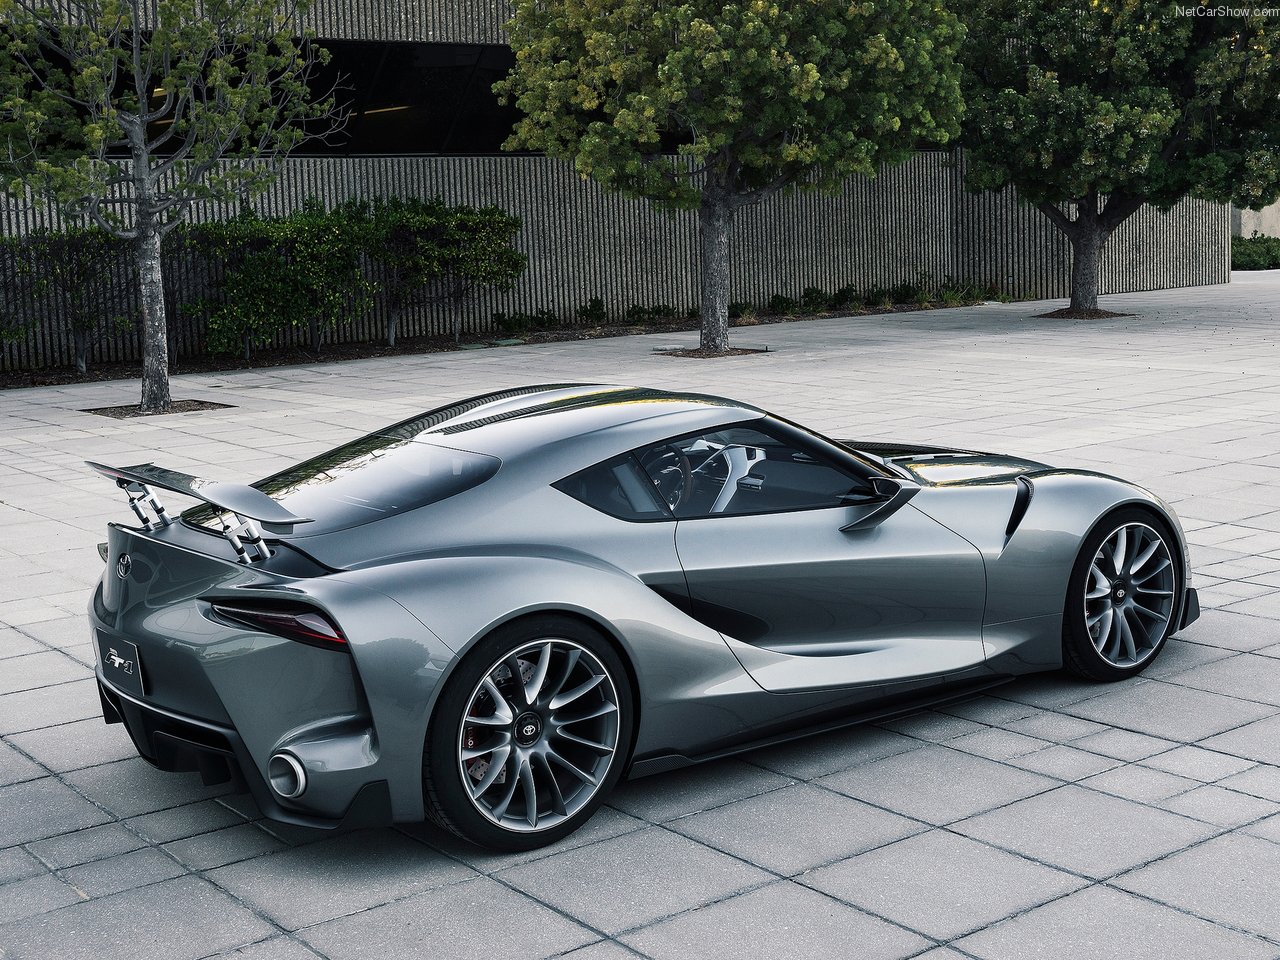 NFS - Need for Speed - Toyota FT-1 Concept